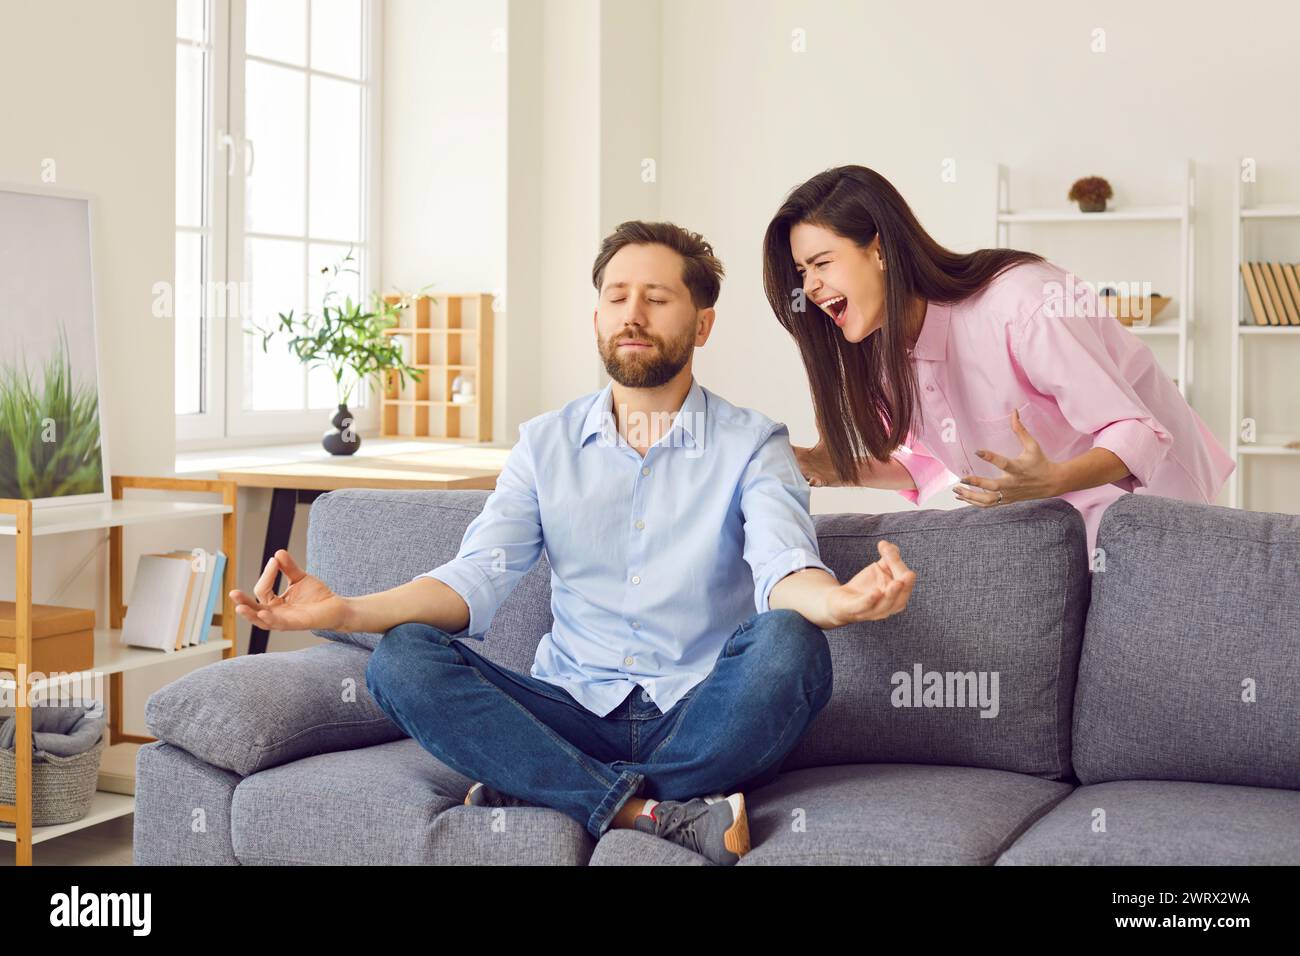 Woman shouting on man doing yoga exercise meditating at home practicing self control ignoring her. Stock Photo